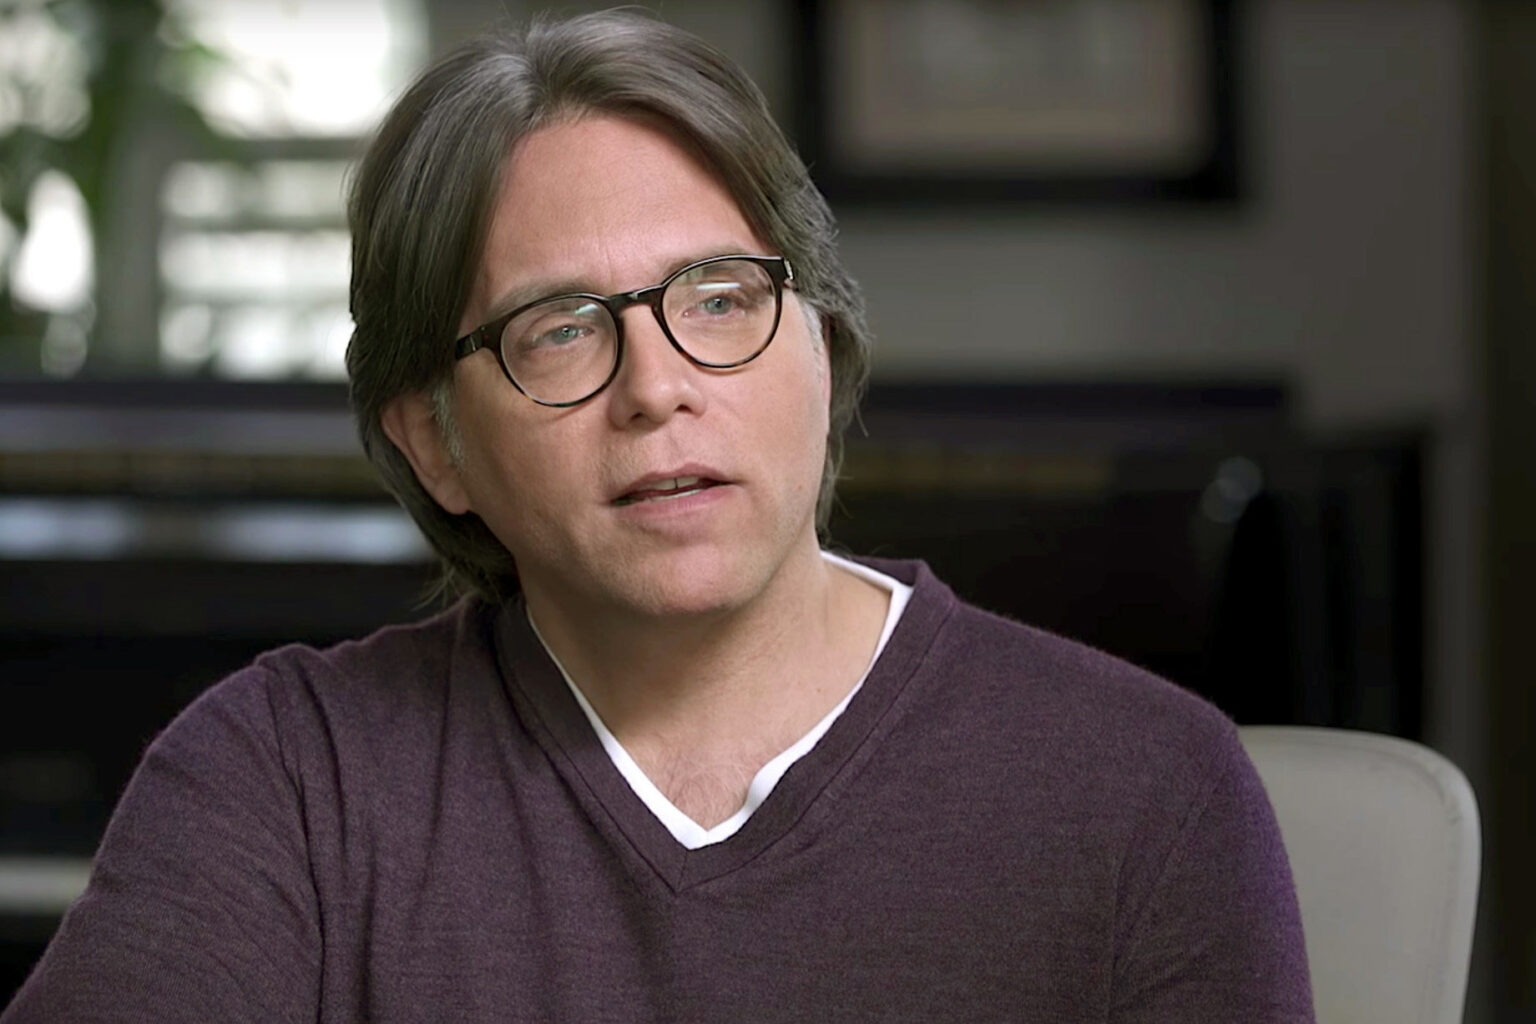 Is Keith Raniere claiming he's innocent? Check out a new letter from Raniere concerning followers of NXIVM right here.